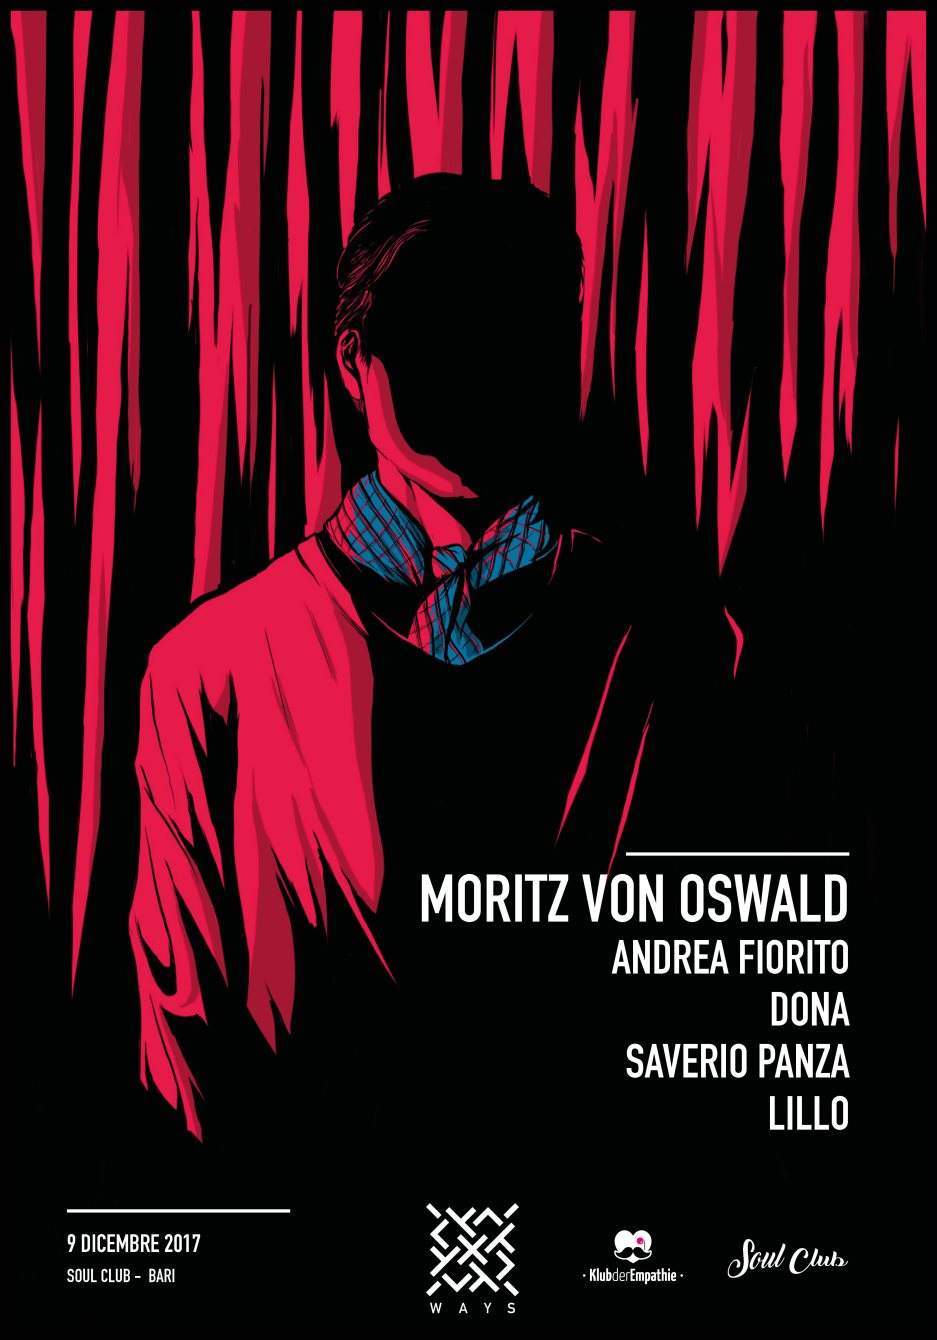 Choose Your Ways with Moritz Von Oswald at Soul Club - Página frontal